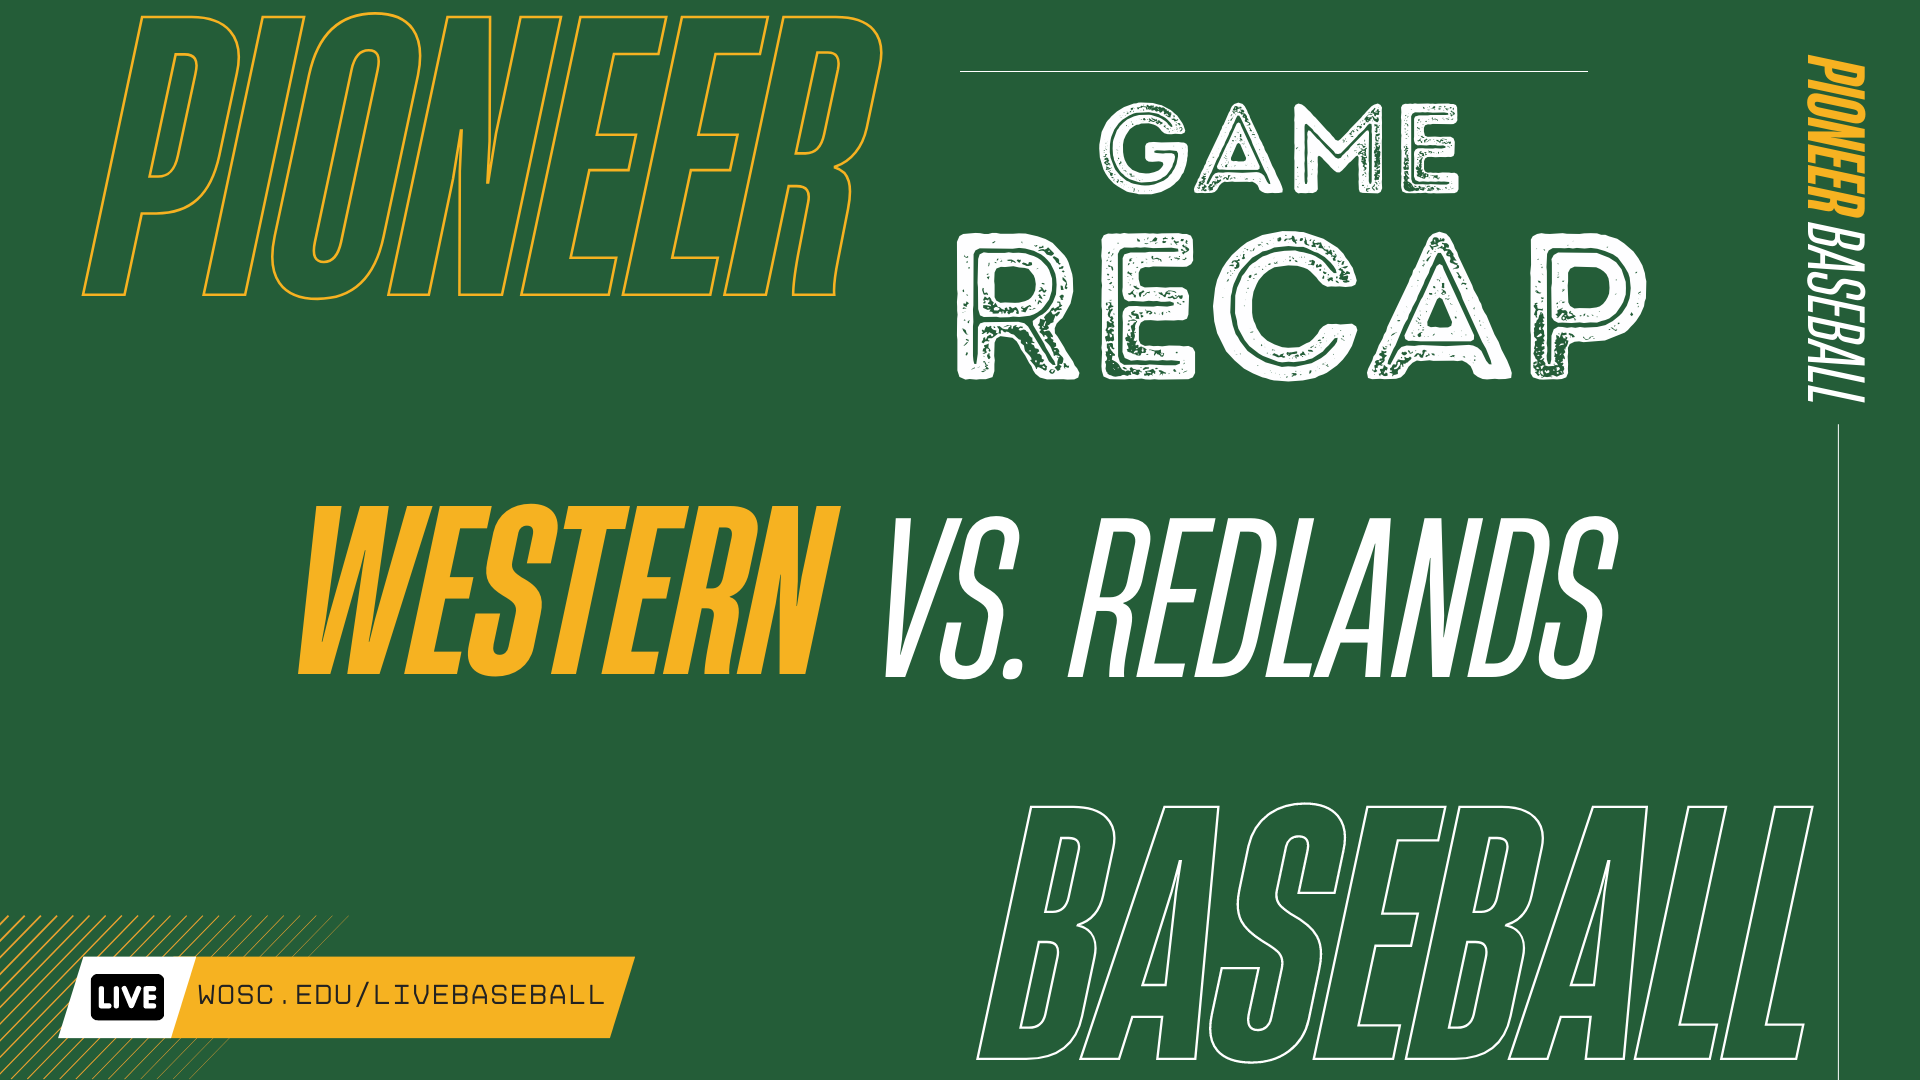 Pitching By Fabian Shuts Out Redlands, Wosc Pioneers Takes The Win